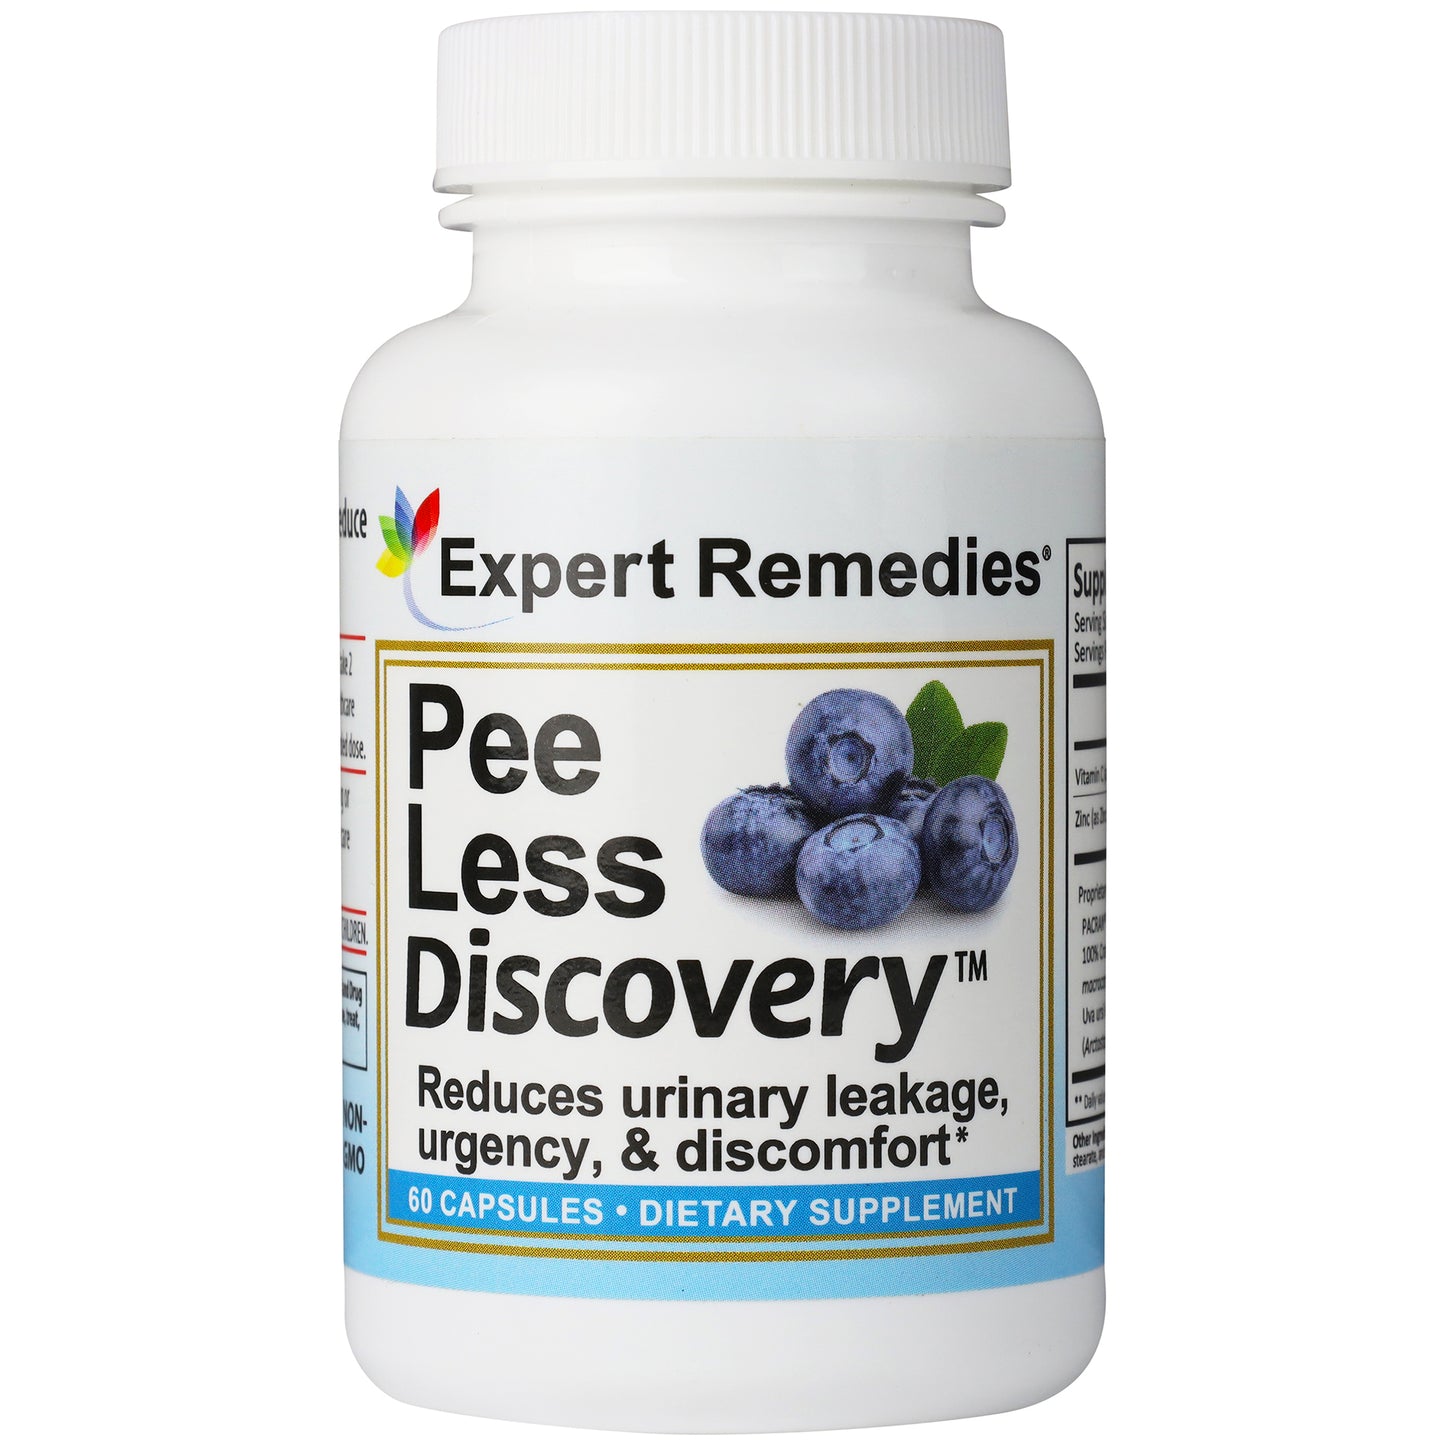 Get 1 Bottle of Pee Less Discovery